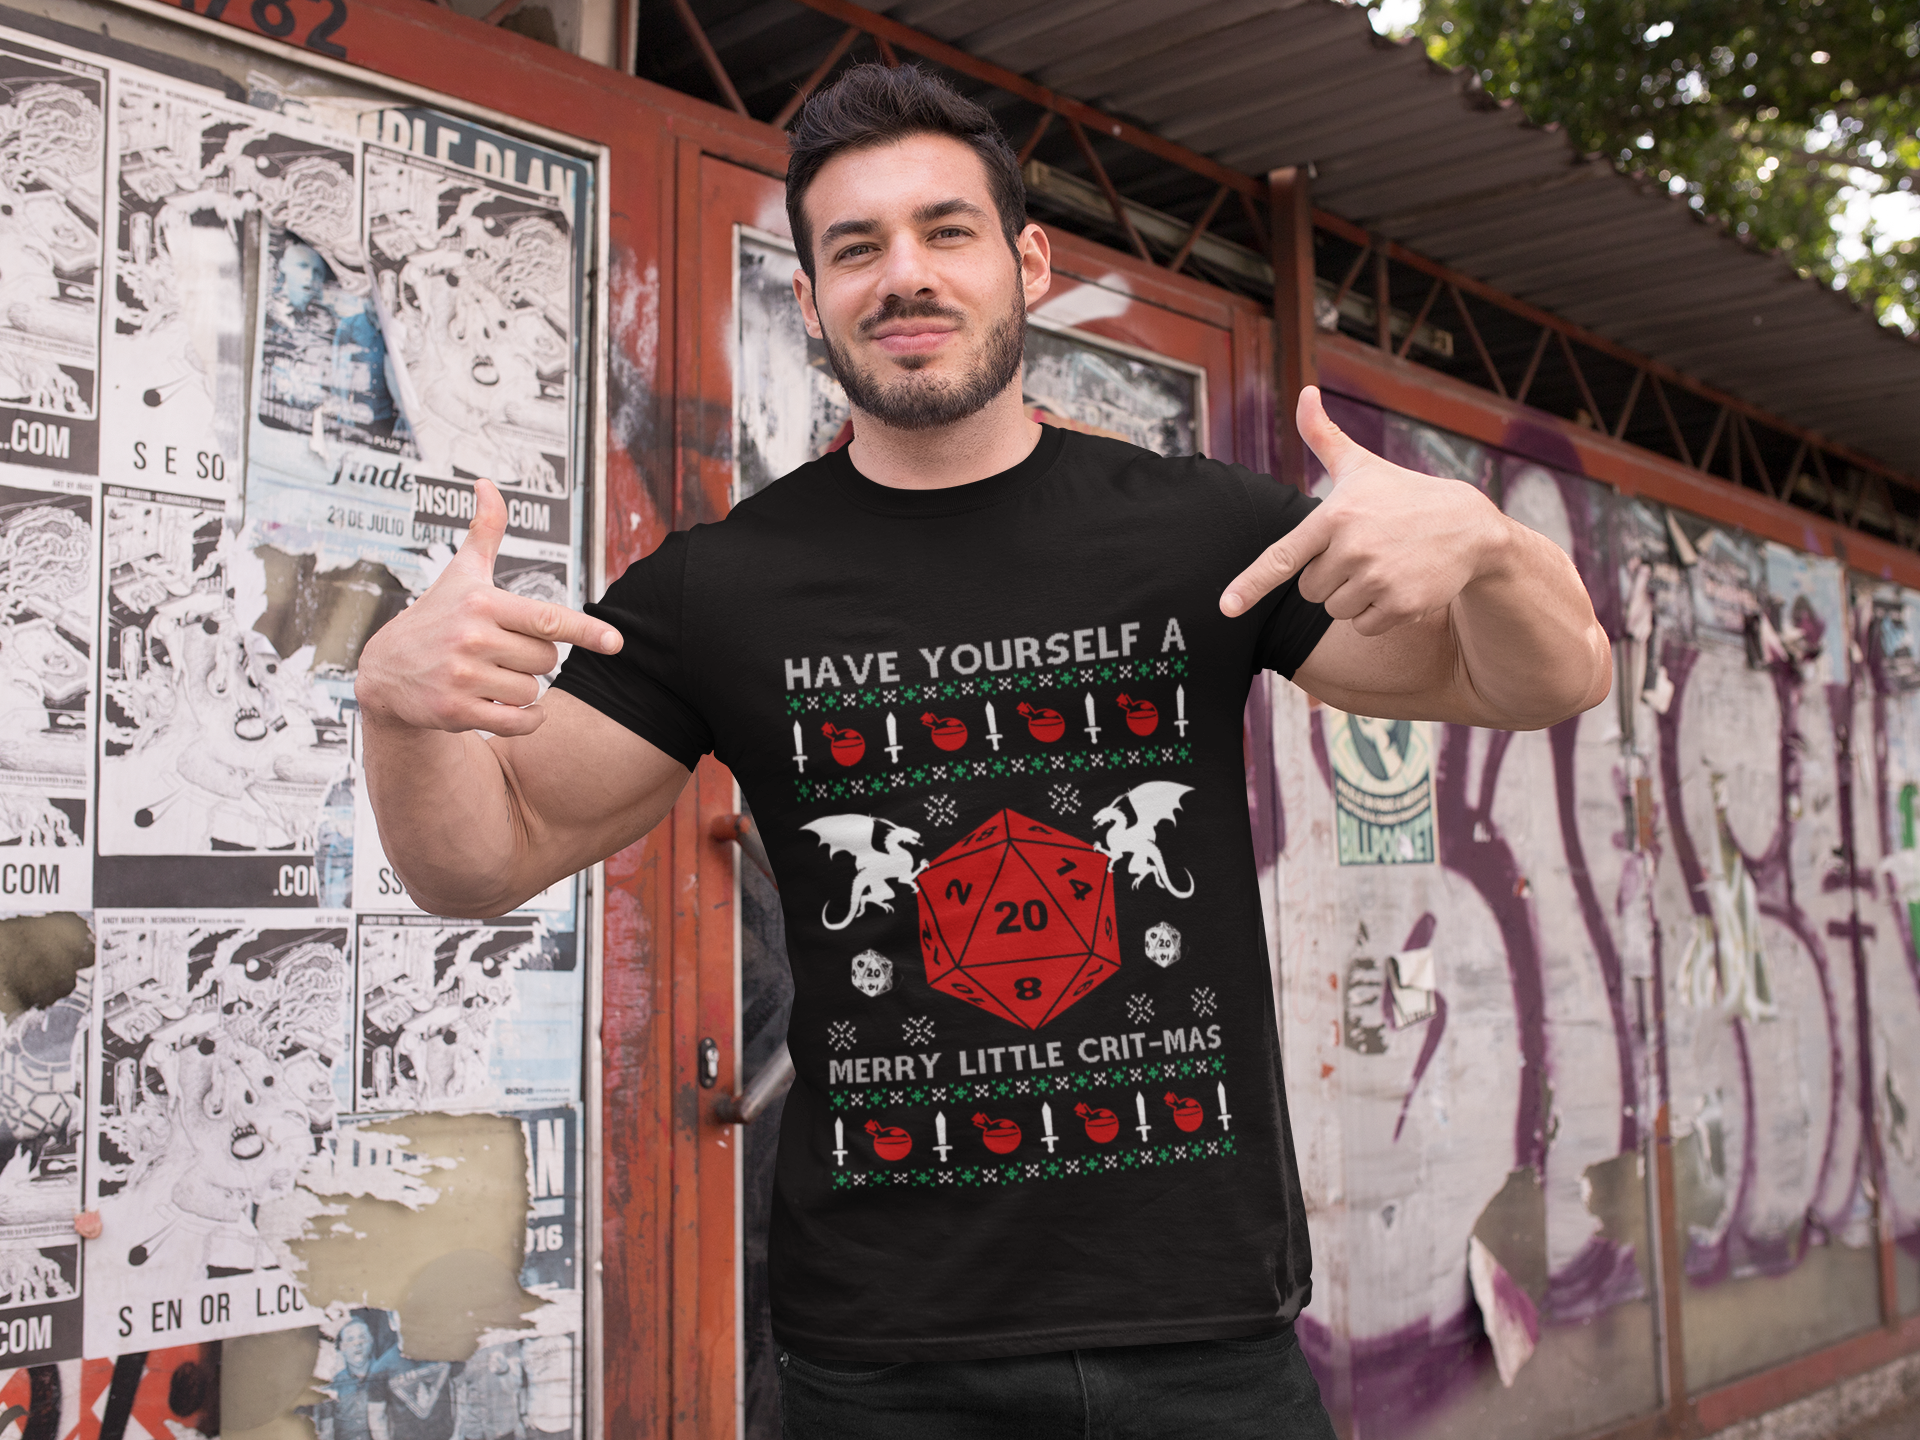 Dungeon And Dragon Ugly Sweater Shirt, RPG Dice Games Tshirt, Have Yourself A Merry Little Crit Mas DND T Shirt, Christmas Gifts